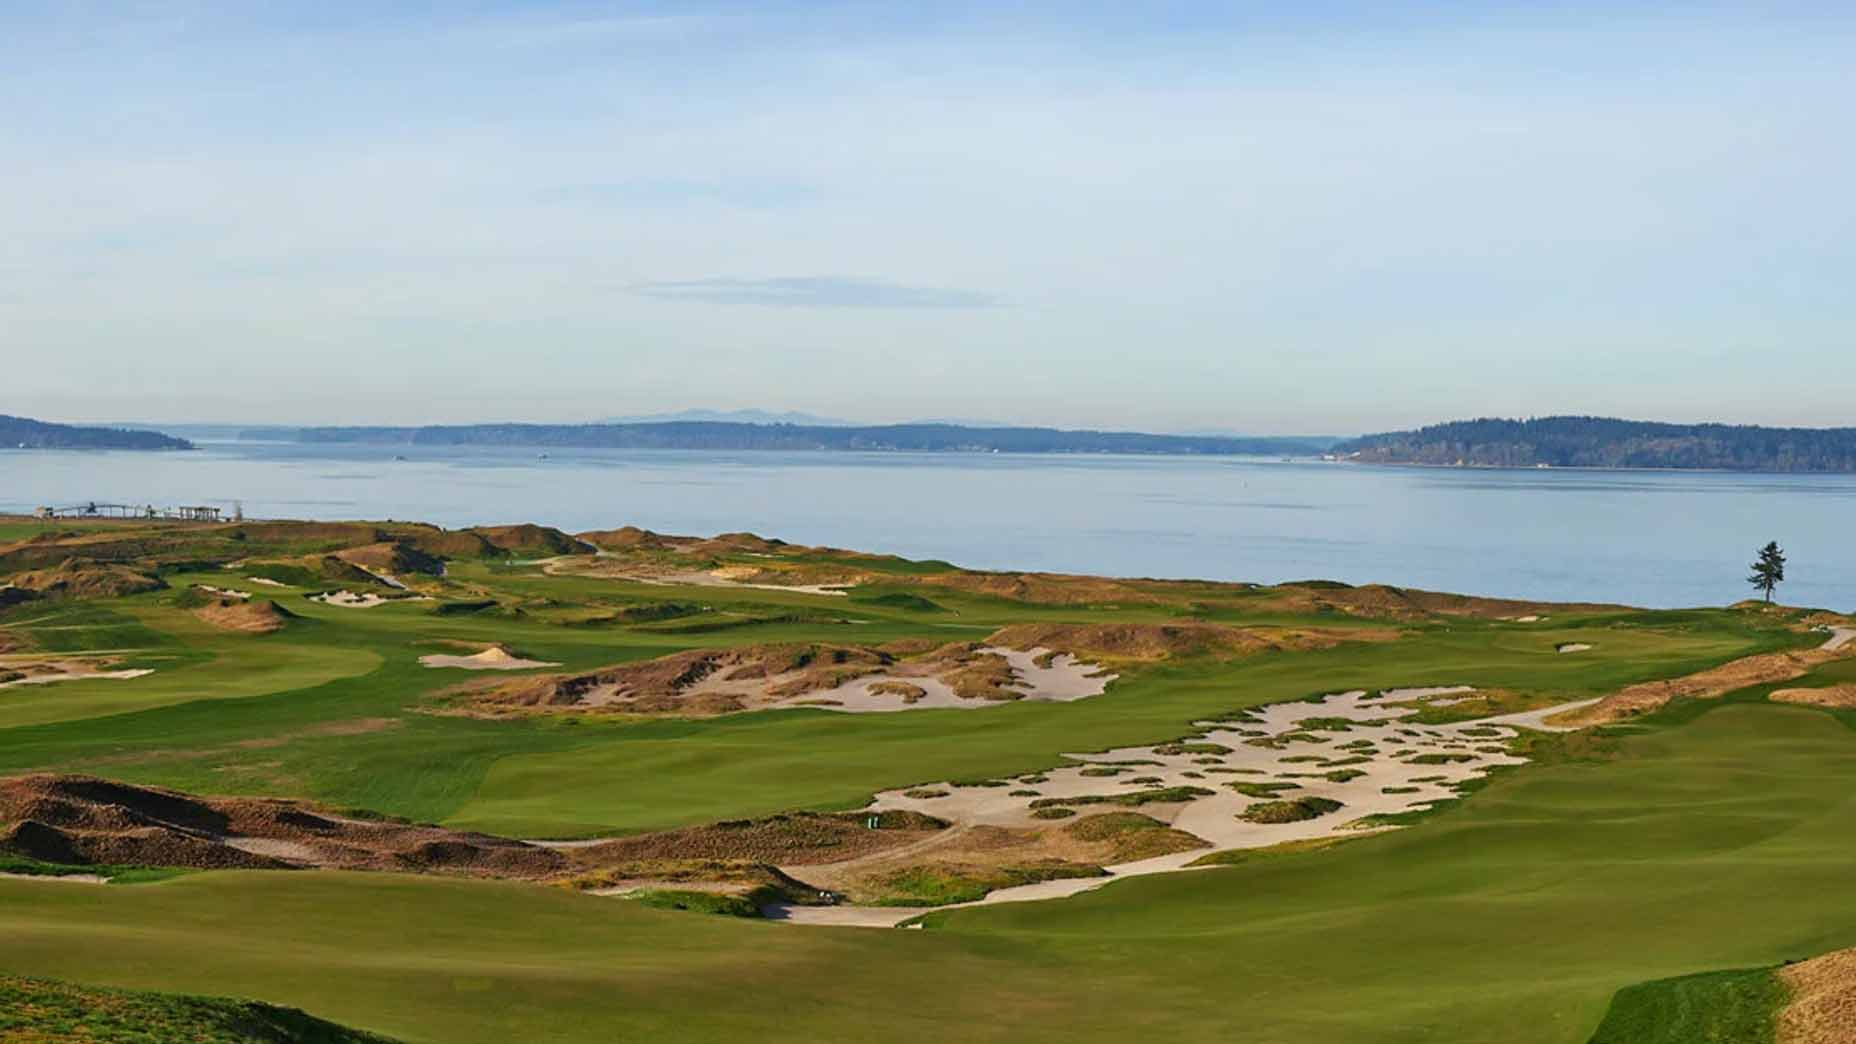 Best golf courses in Washington, according to GOLF Magazine’s expert course raters